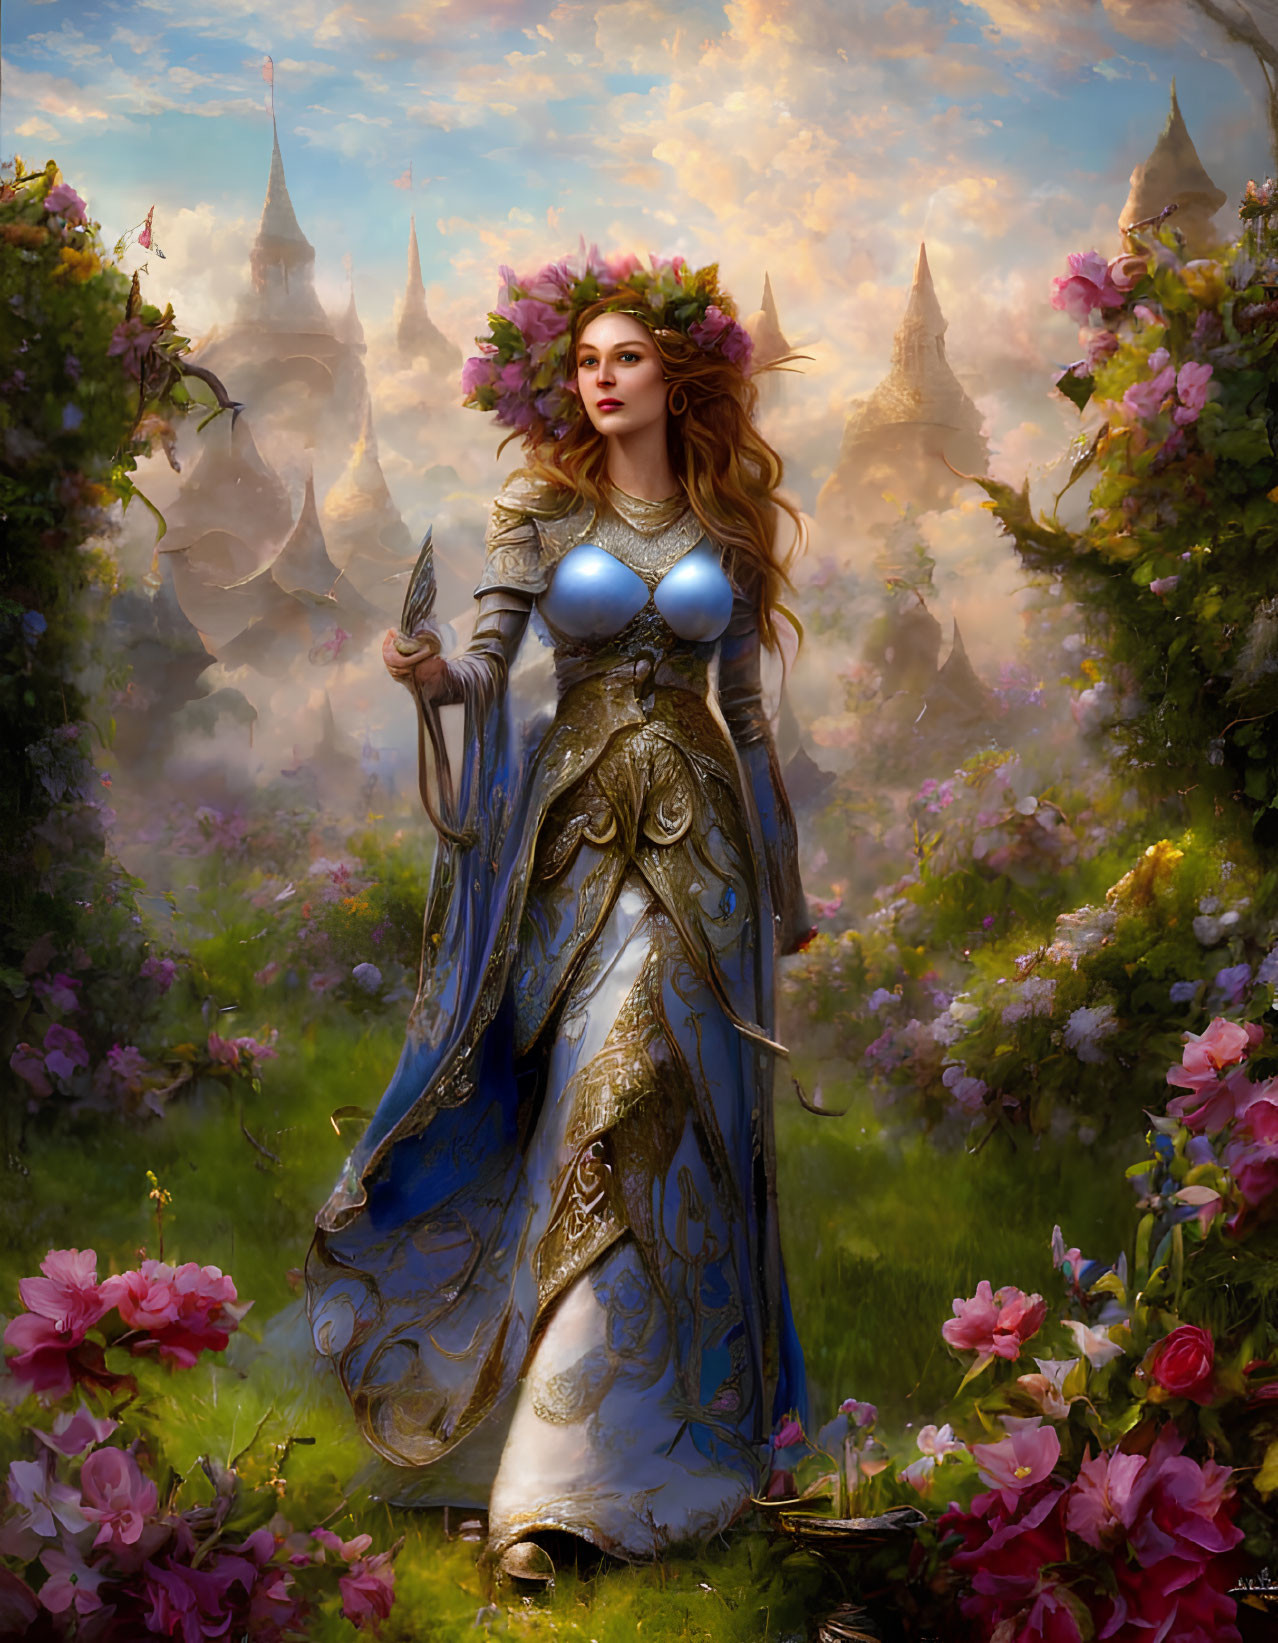 Medieval armored woman with floral crown and sword in misty castle background